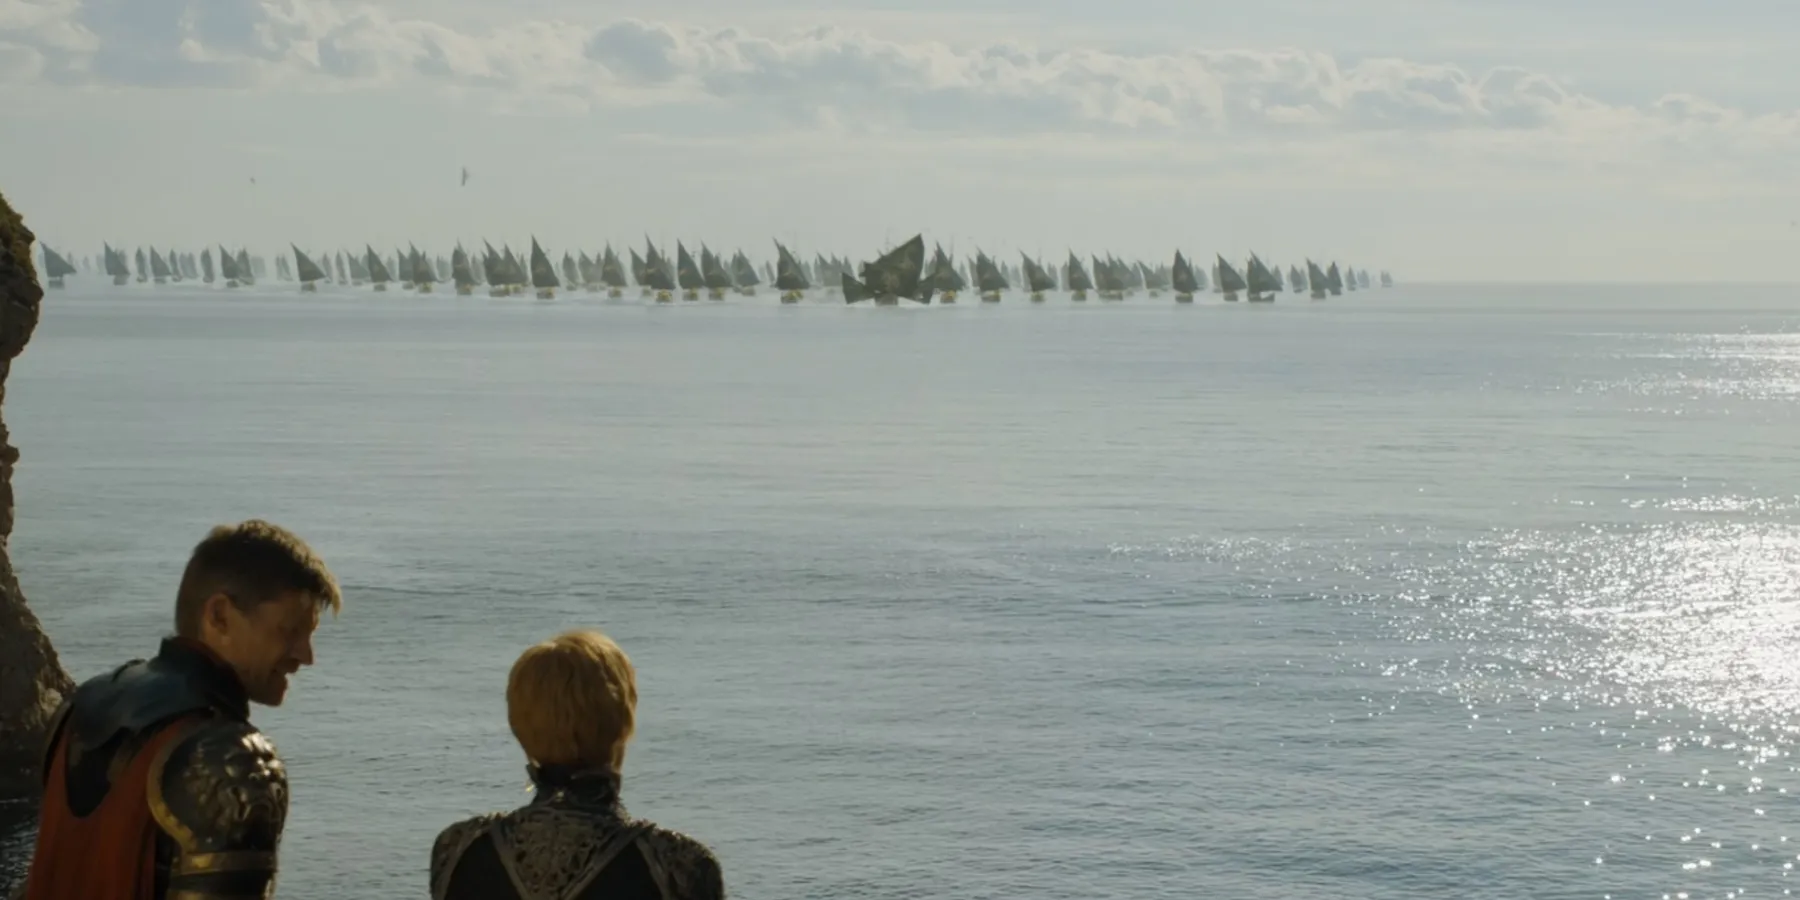 Jaime and Cersei Lannister watch the Iron Fleet’s arrival in Game of Thrones.